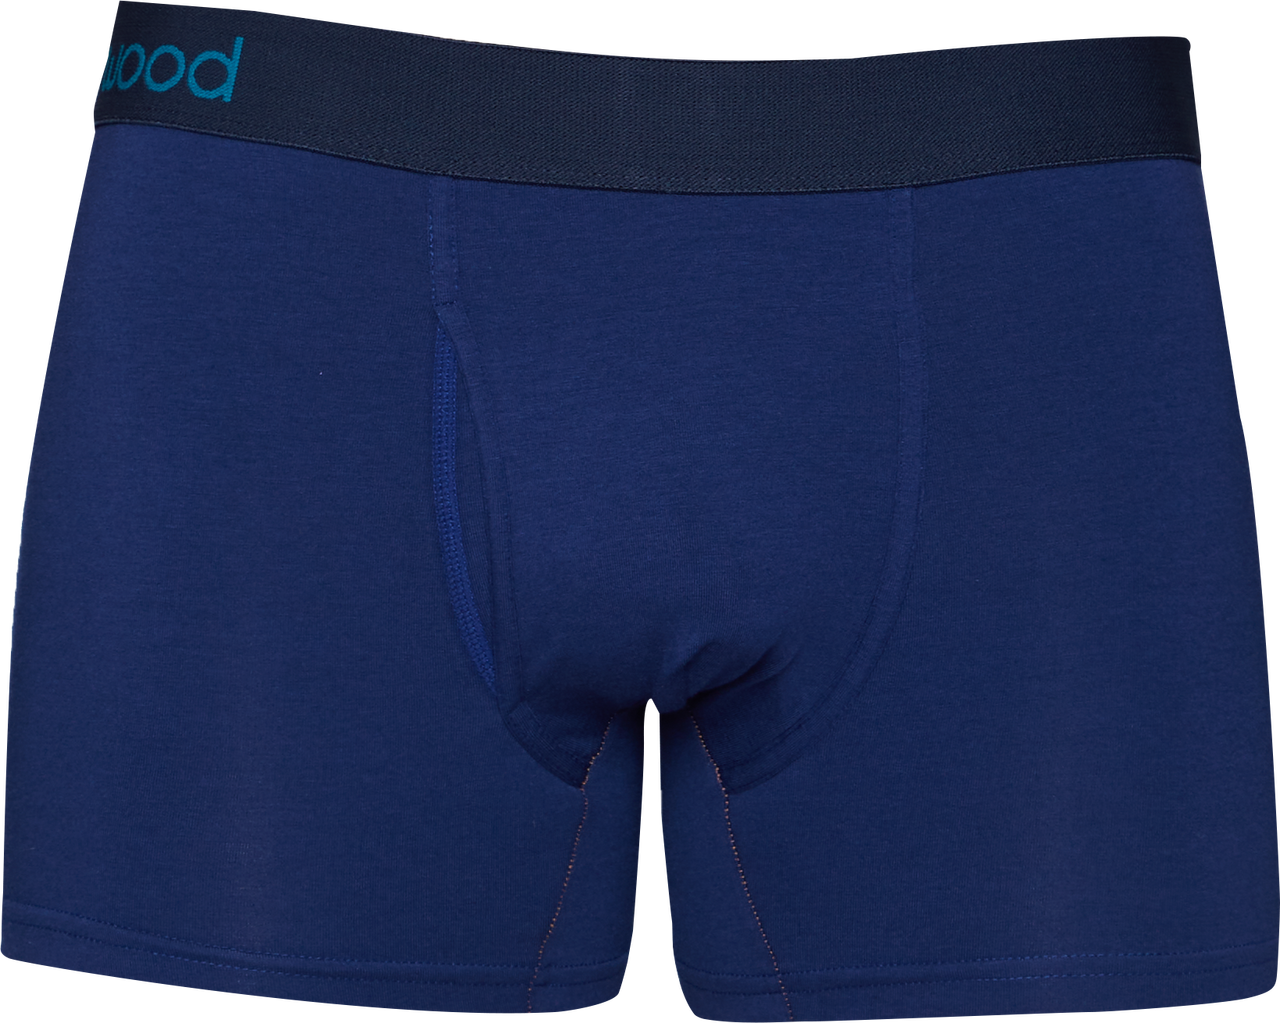 4-Pack Boxer Briefs w/ Fly in Darks (Stock Up & Save!) by Wood Underwear